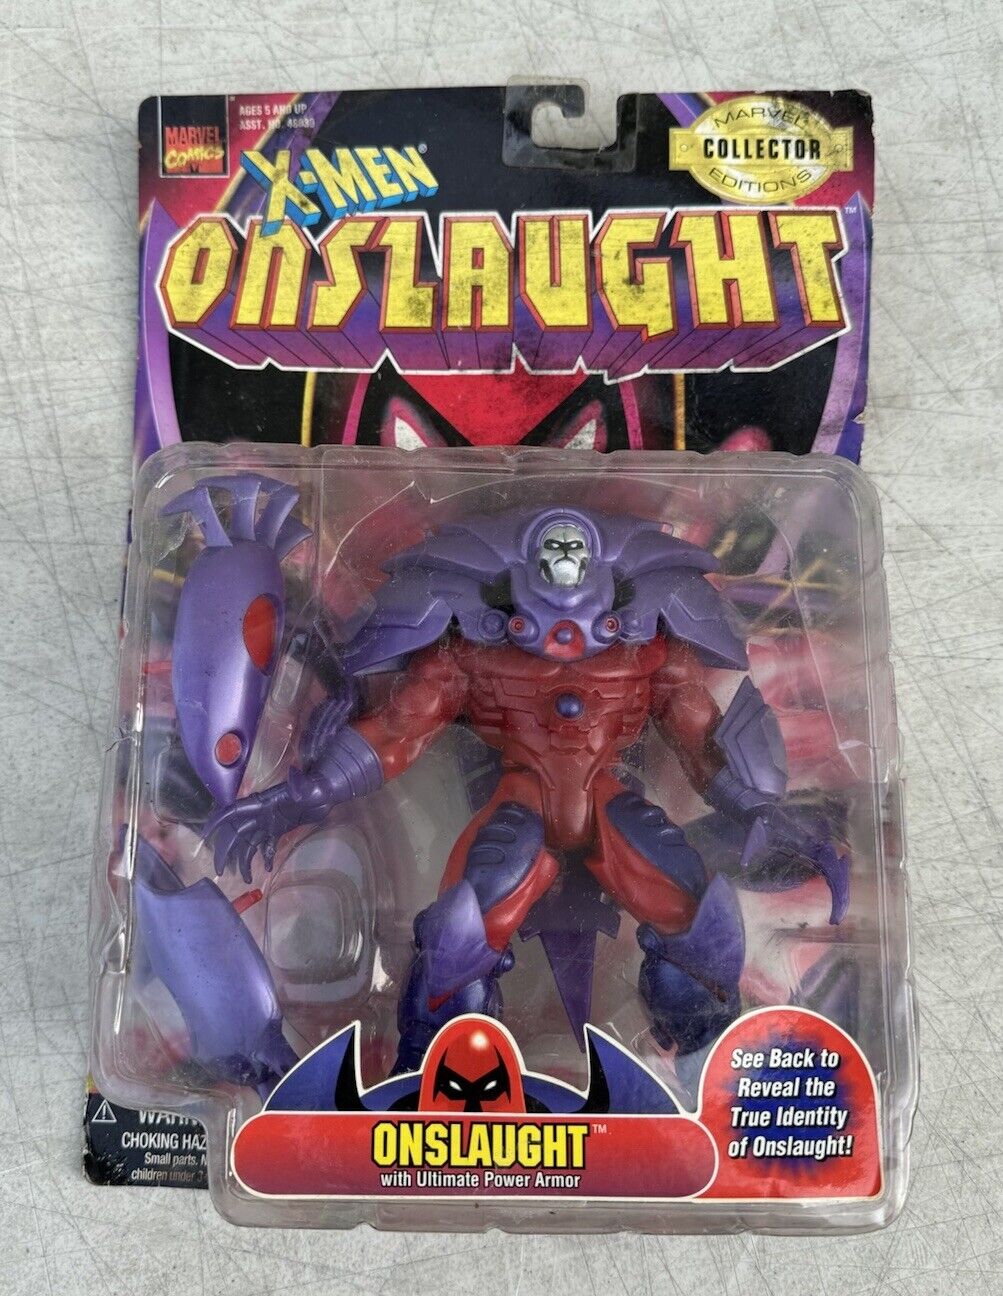 Vintage X-Men Onslaught Action Figure w/ Ultimate Power Armor Toy Biz 1997 NEW